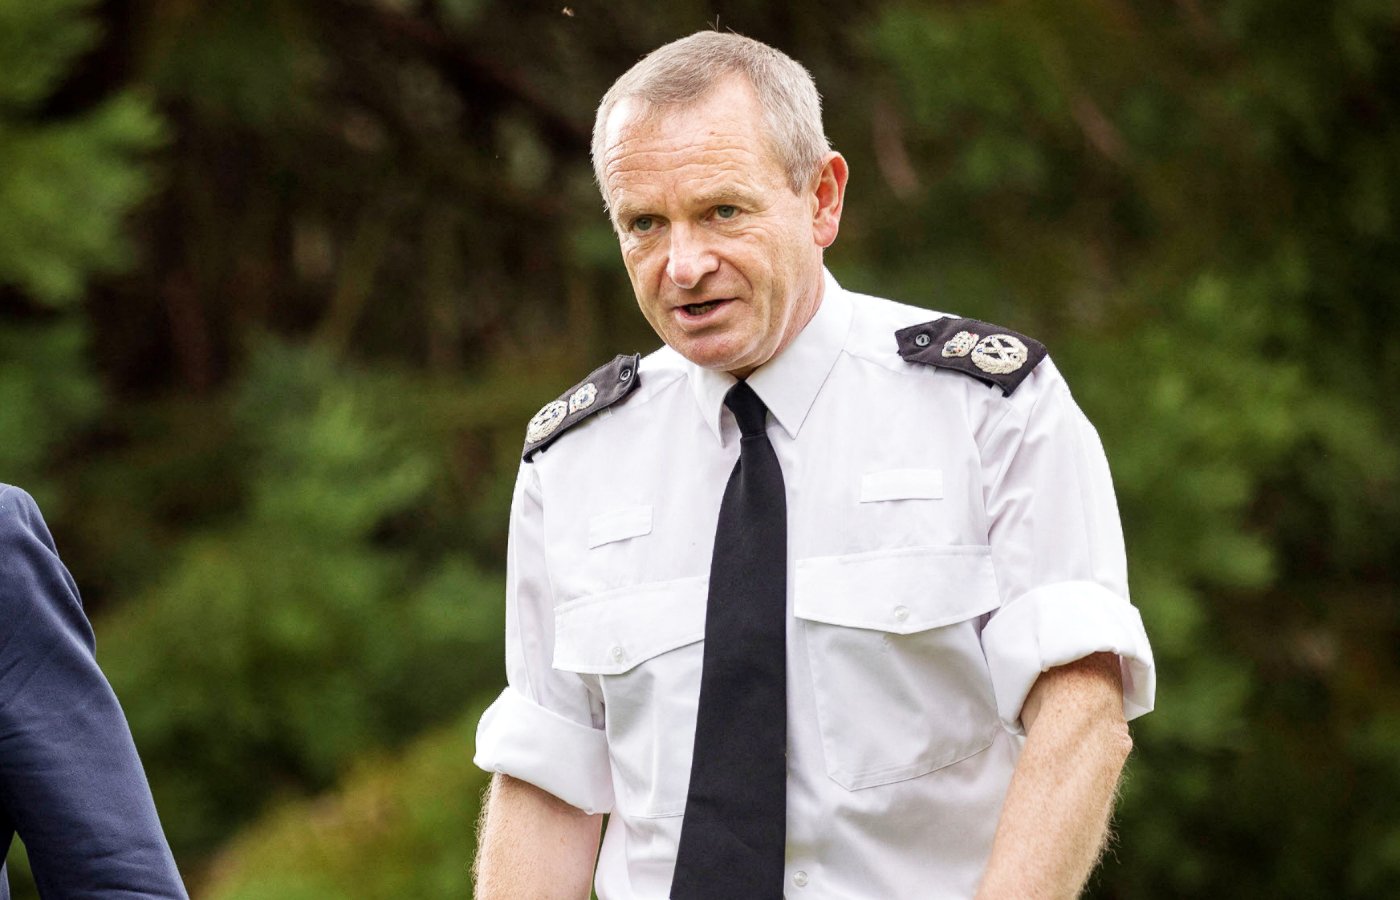 Sir Iain Livingstone has been a serving police officer since 1992.